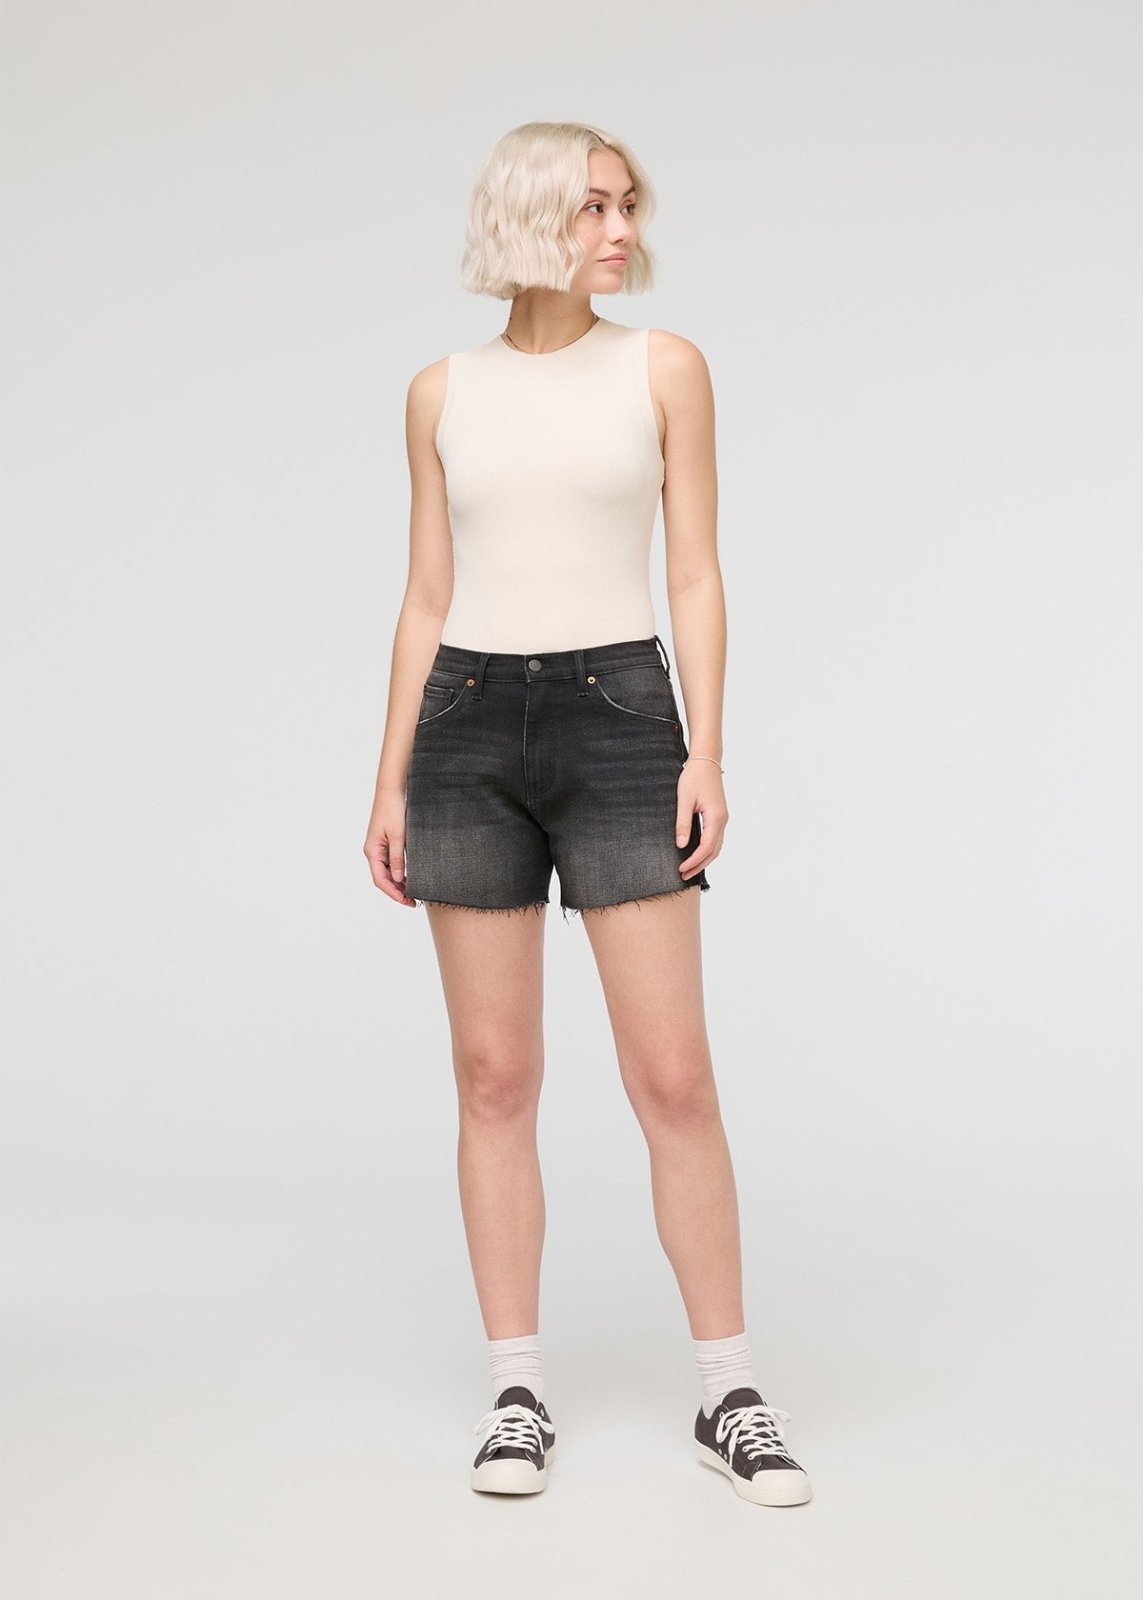 Women's Stretch Shorts - Performance by DUER